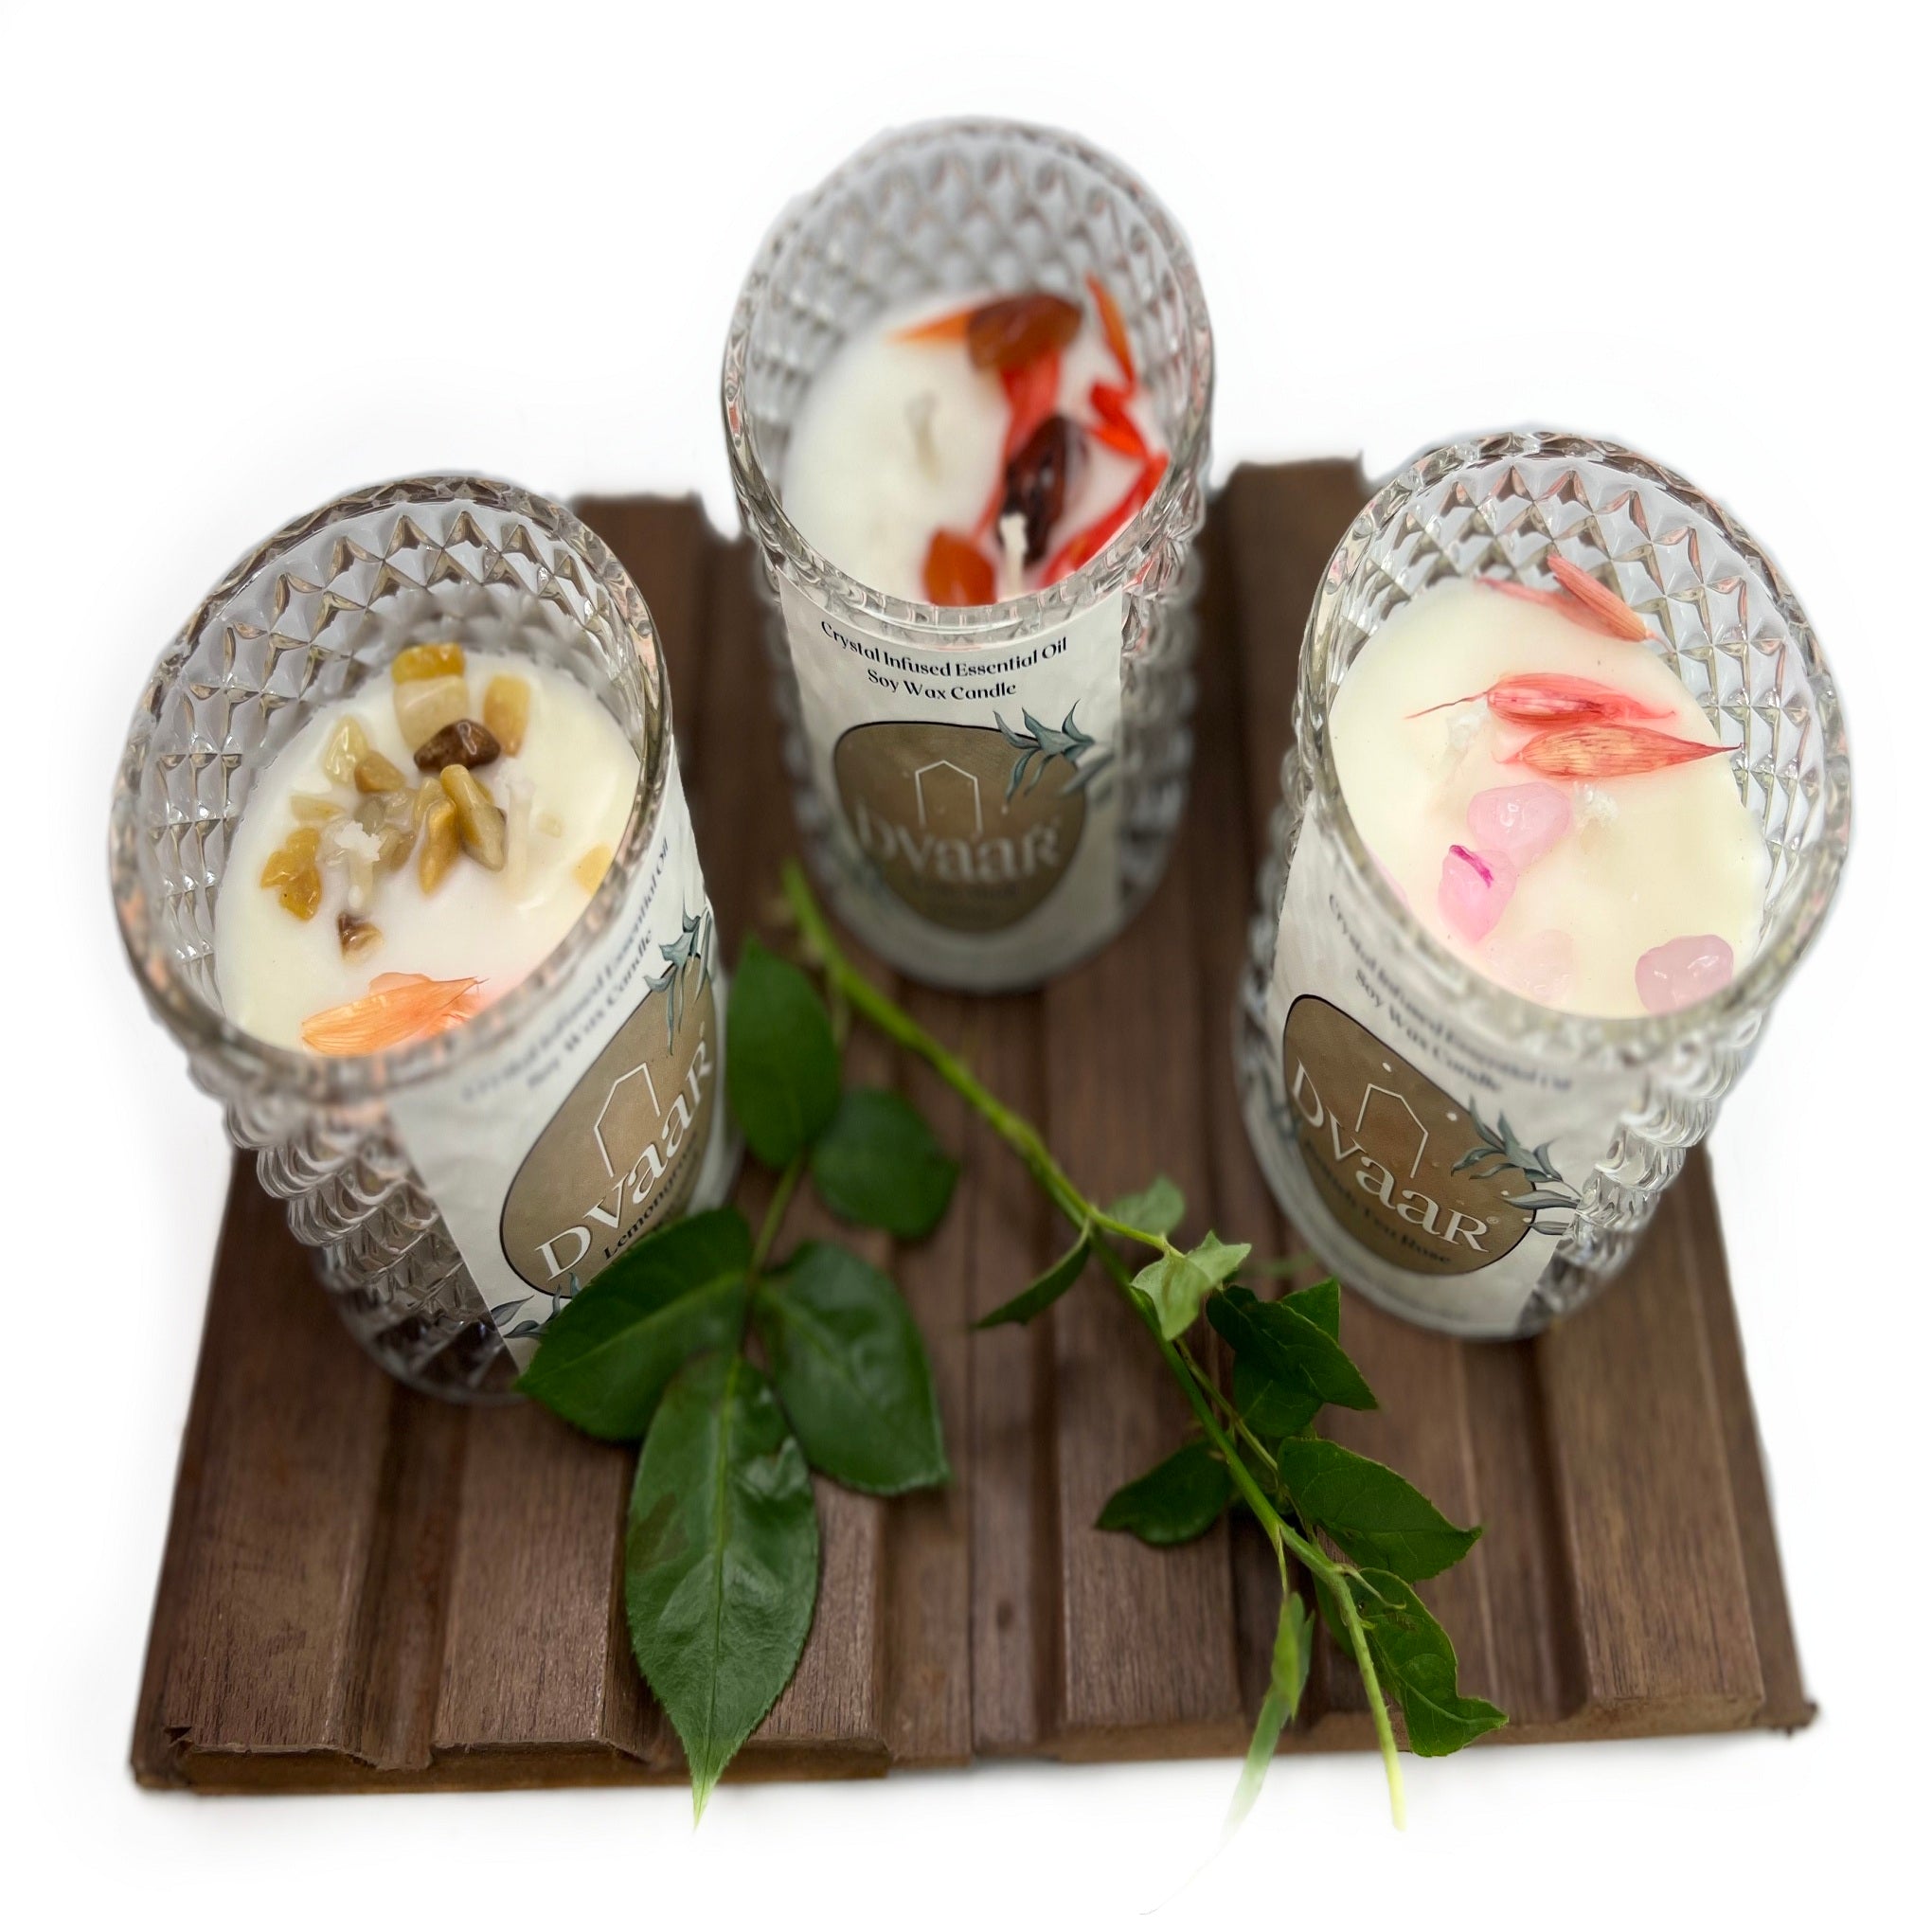 DVAAR SOYA WAX CANDLES SCENTED ECO FRIENDLY AROMATHERAPY MEDITATION HAND CRAFTED WITH NATURAL OILS CRYSTALS with GLASS JAR 280 GMS. FRAGRANCE- White Musk and Lemon